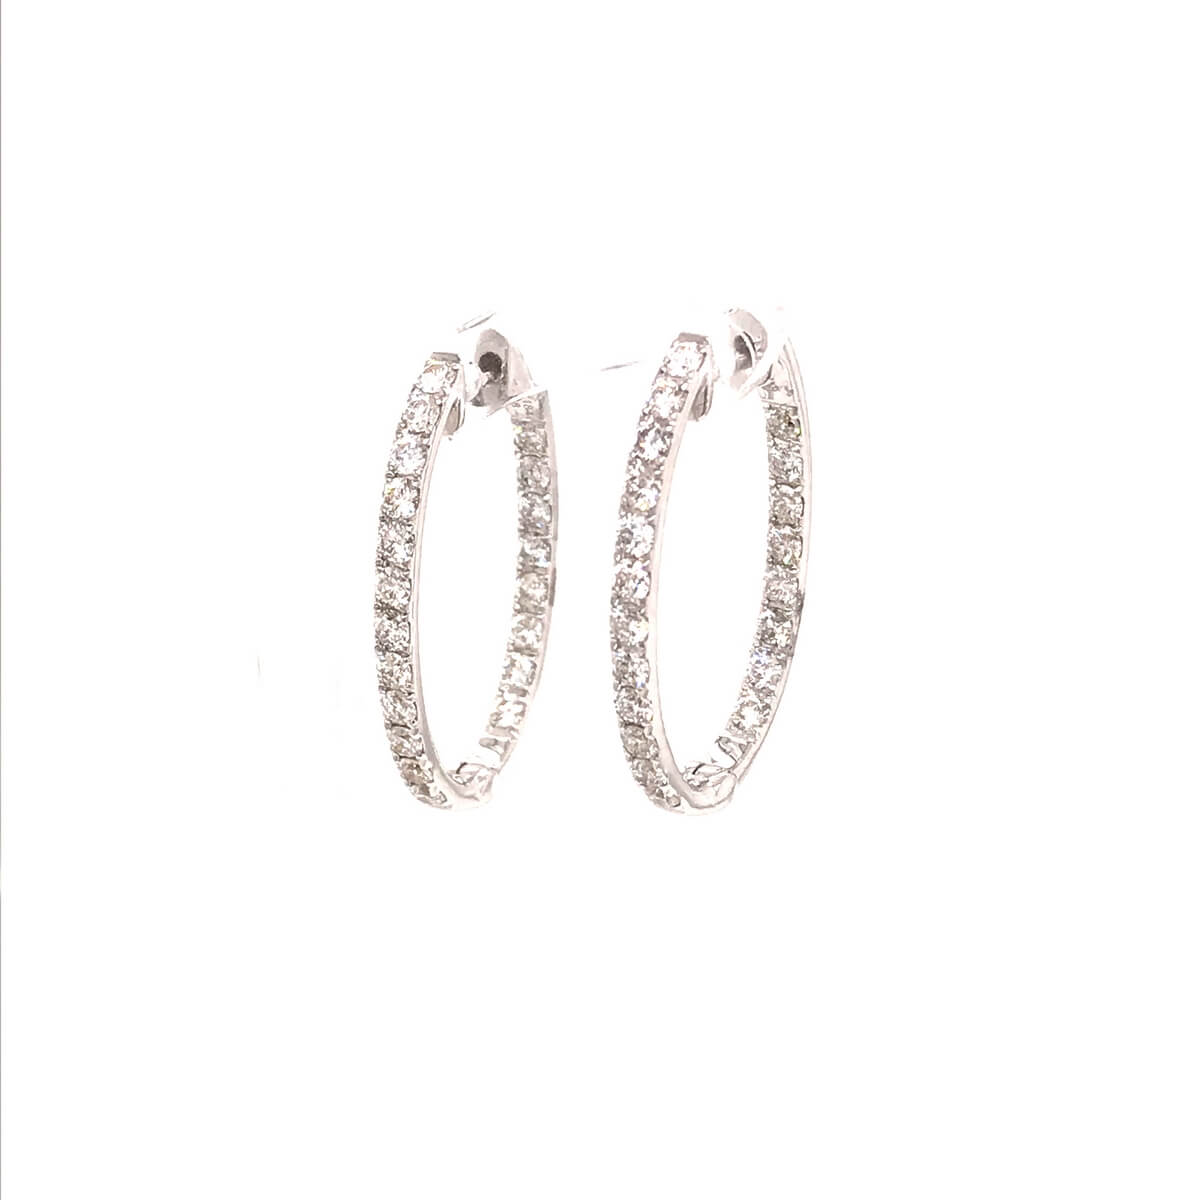 1.18ct Round Brilliant Cut Diamond Hoop Earrings | Cry For The Moon